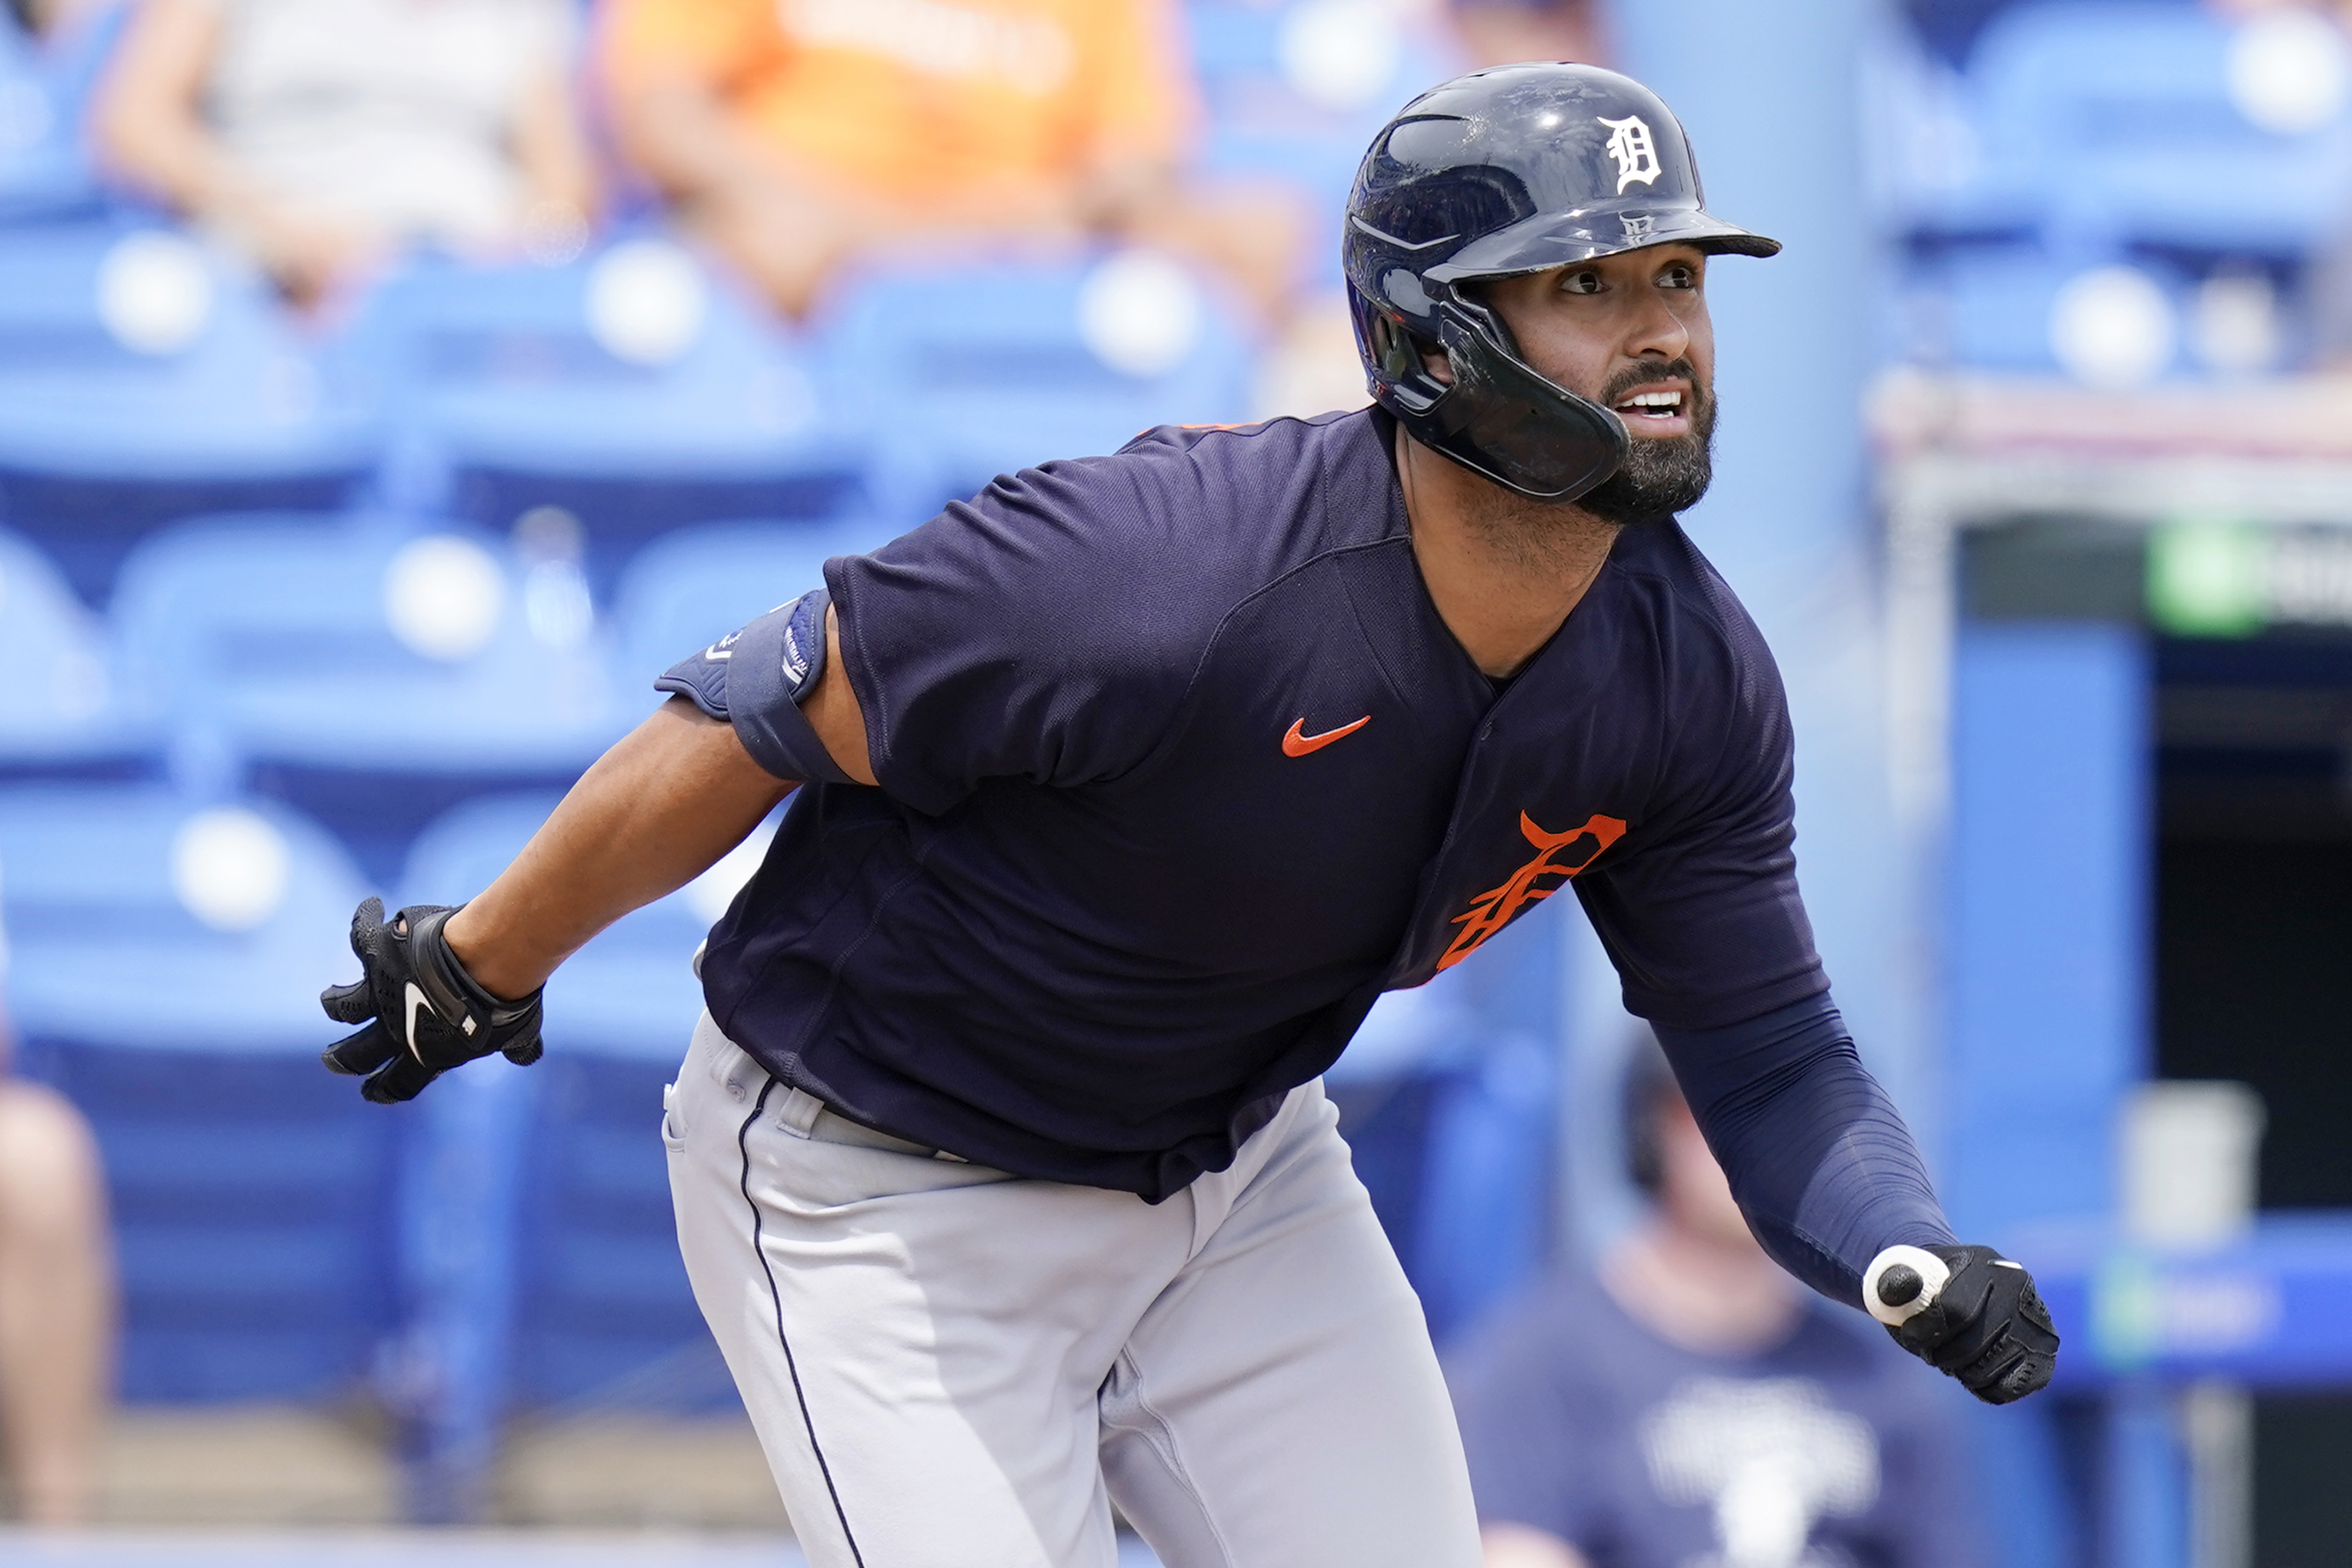 Tigers outfielder Riley Greene to undergo elbow surgery Wednesday